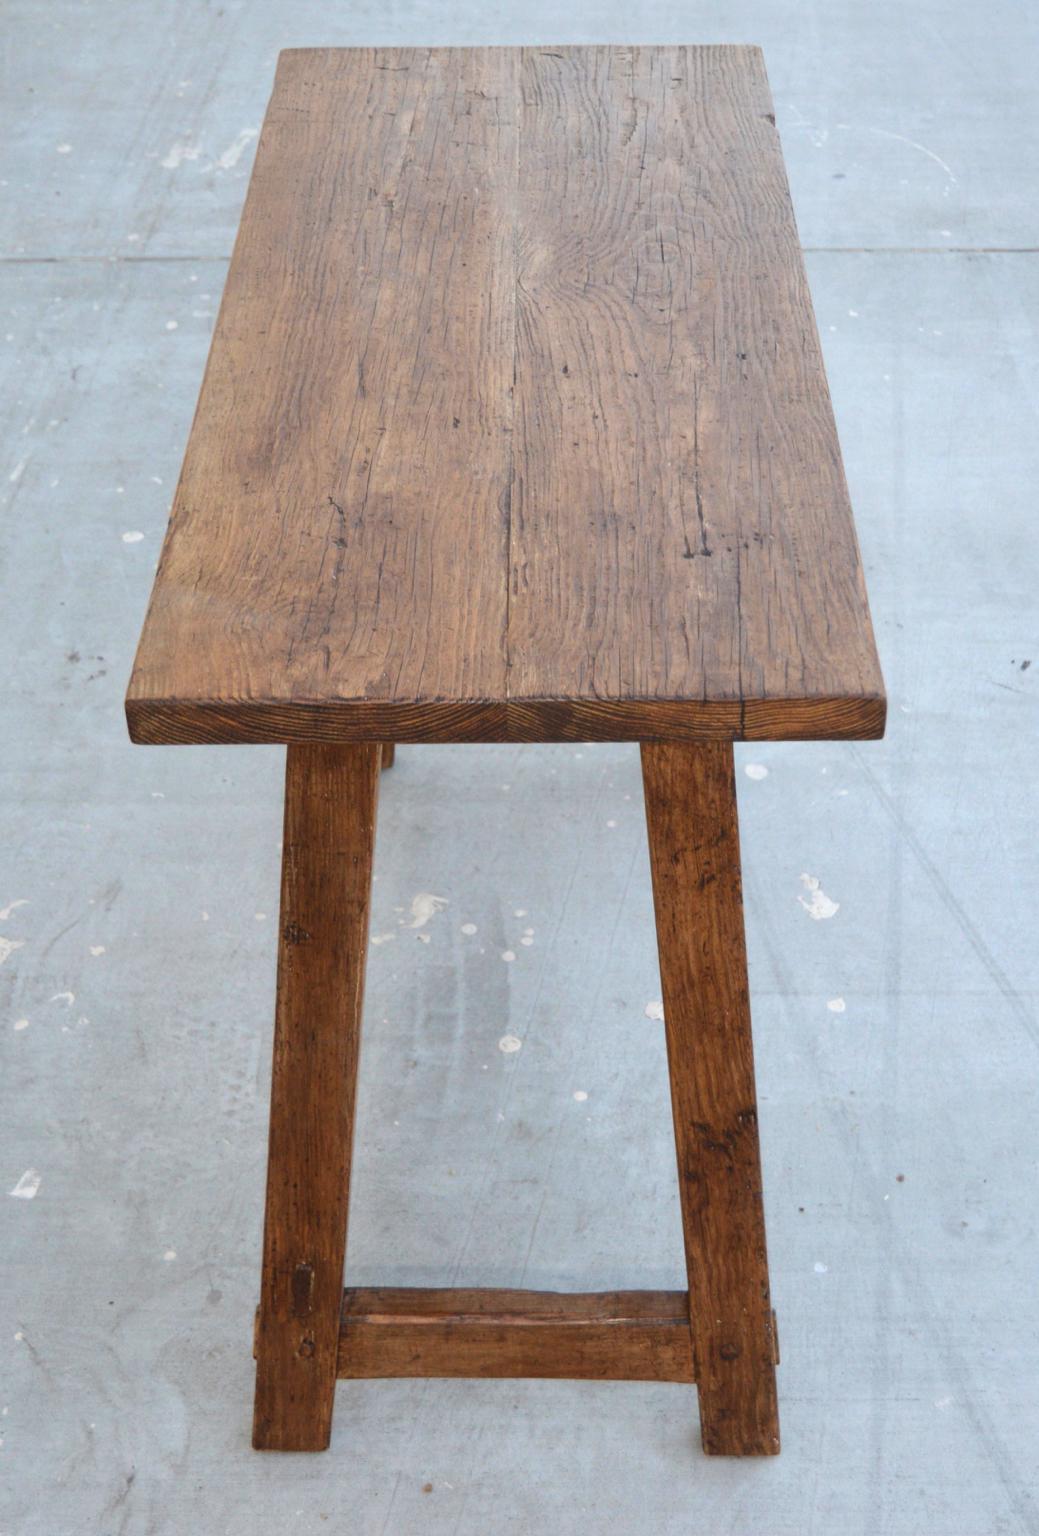 Primitive Custom Desk or Writing Table Made from Reclaimed Pine